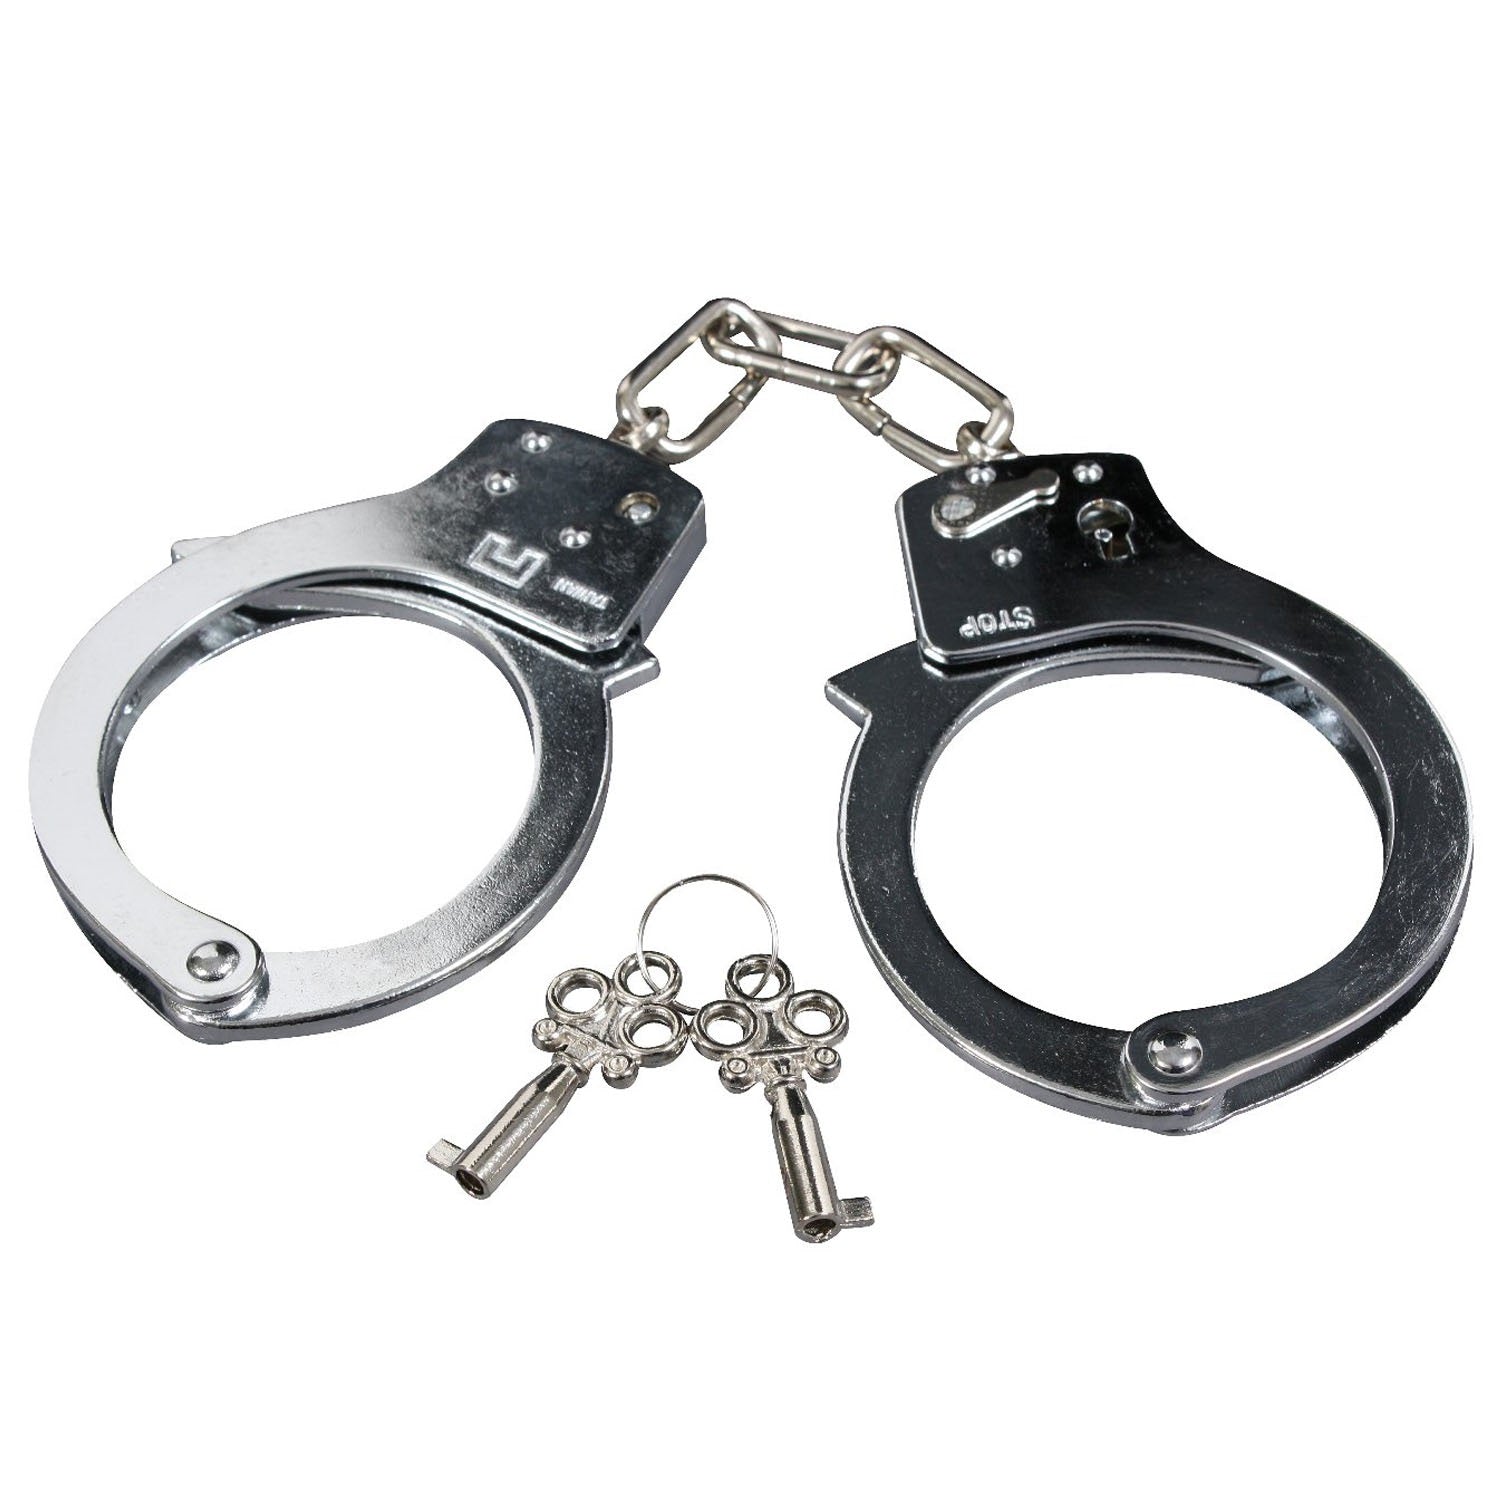 Rothco Double Lock Steel Handcuffs Silver